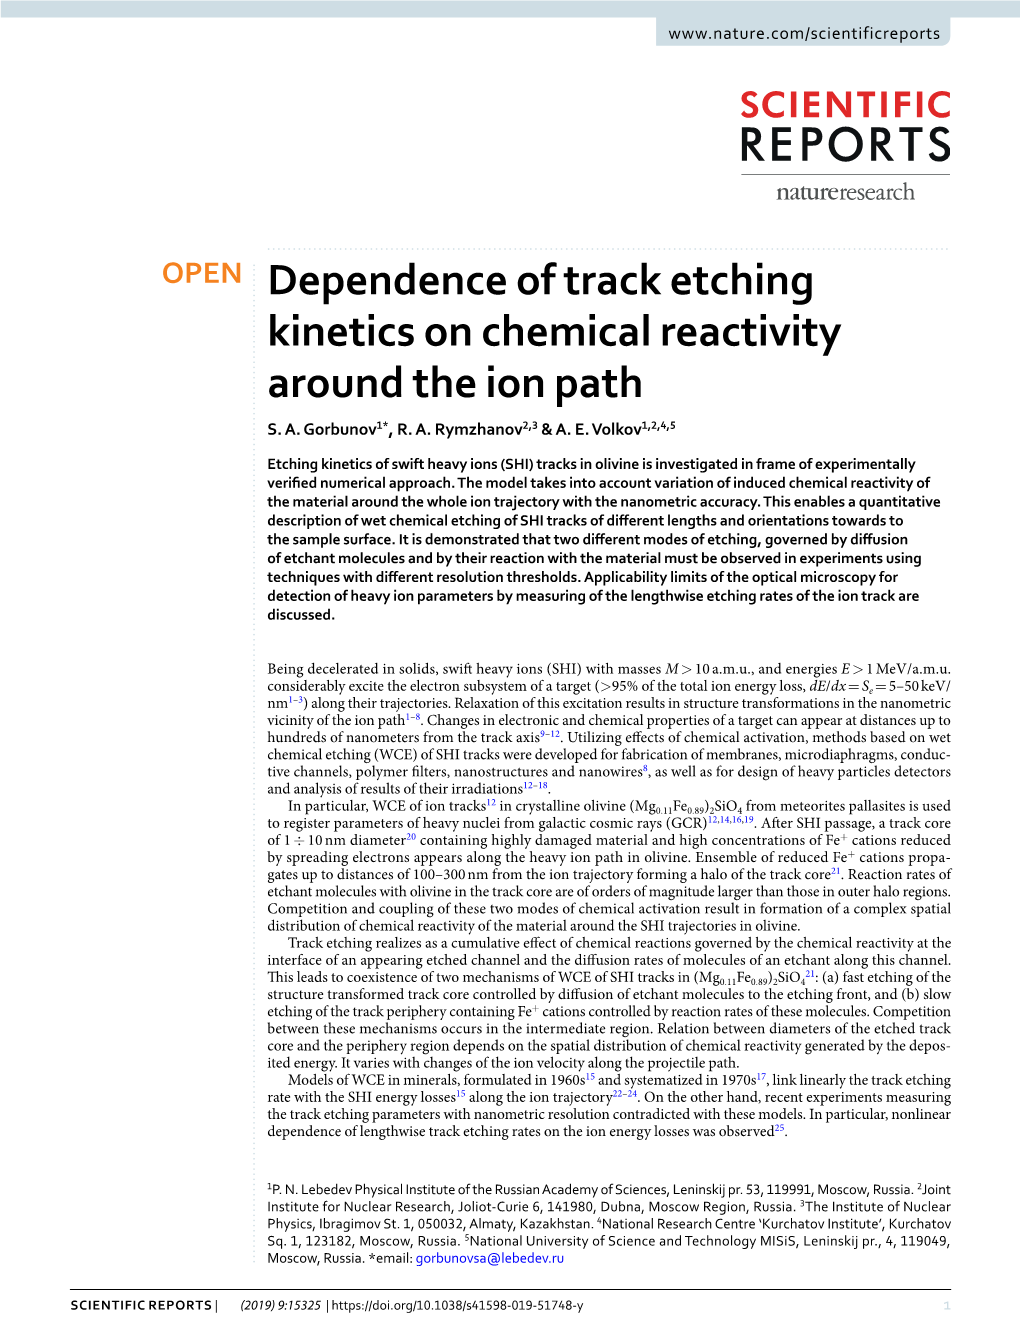 Dependence of Track Etching Kinetics on Chemical Reactivity Around the Ion Path S